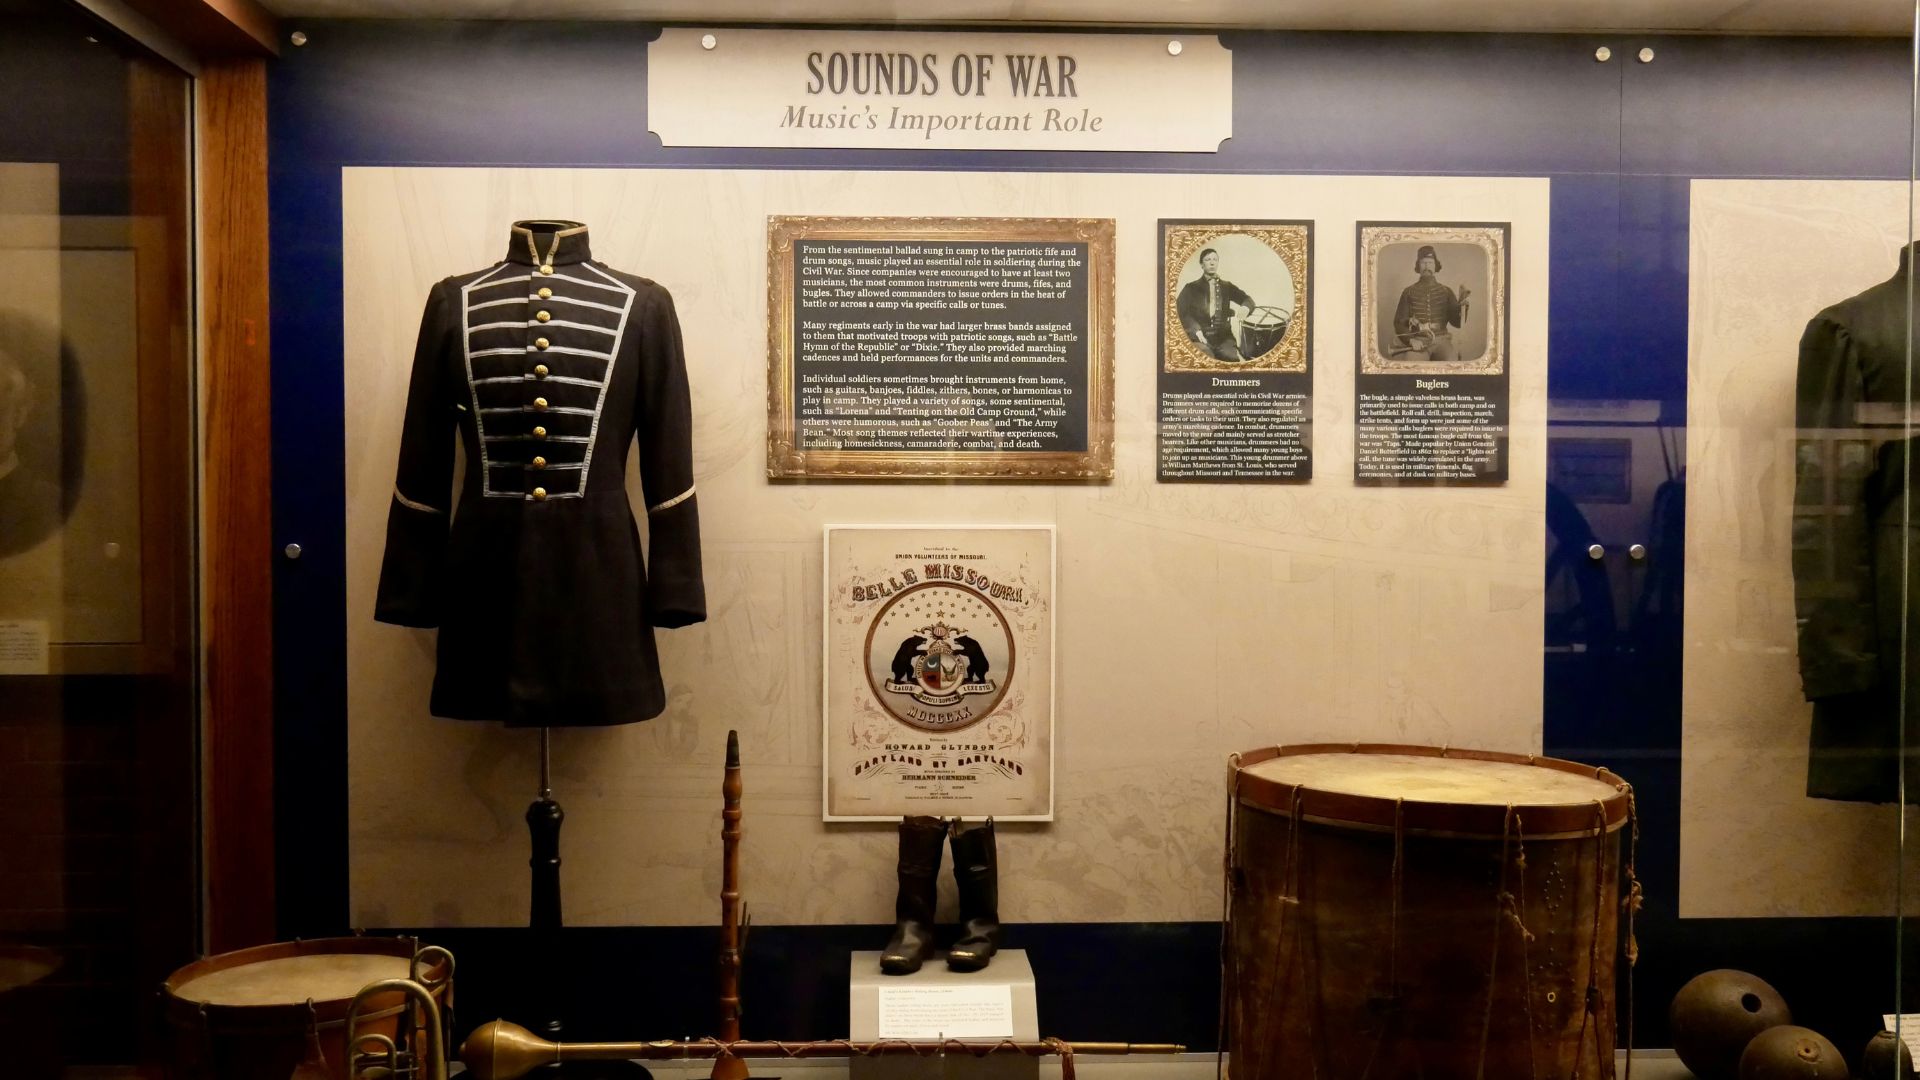 An exhibit at the Missouri Civil War Museum illustrates the important role of music in the conflict.